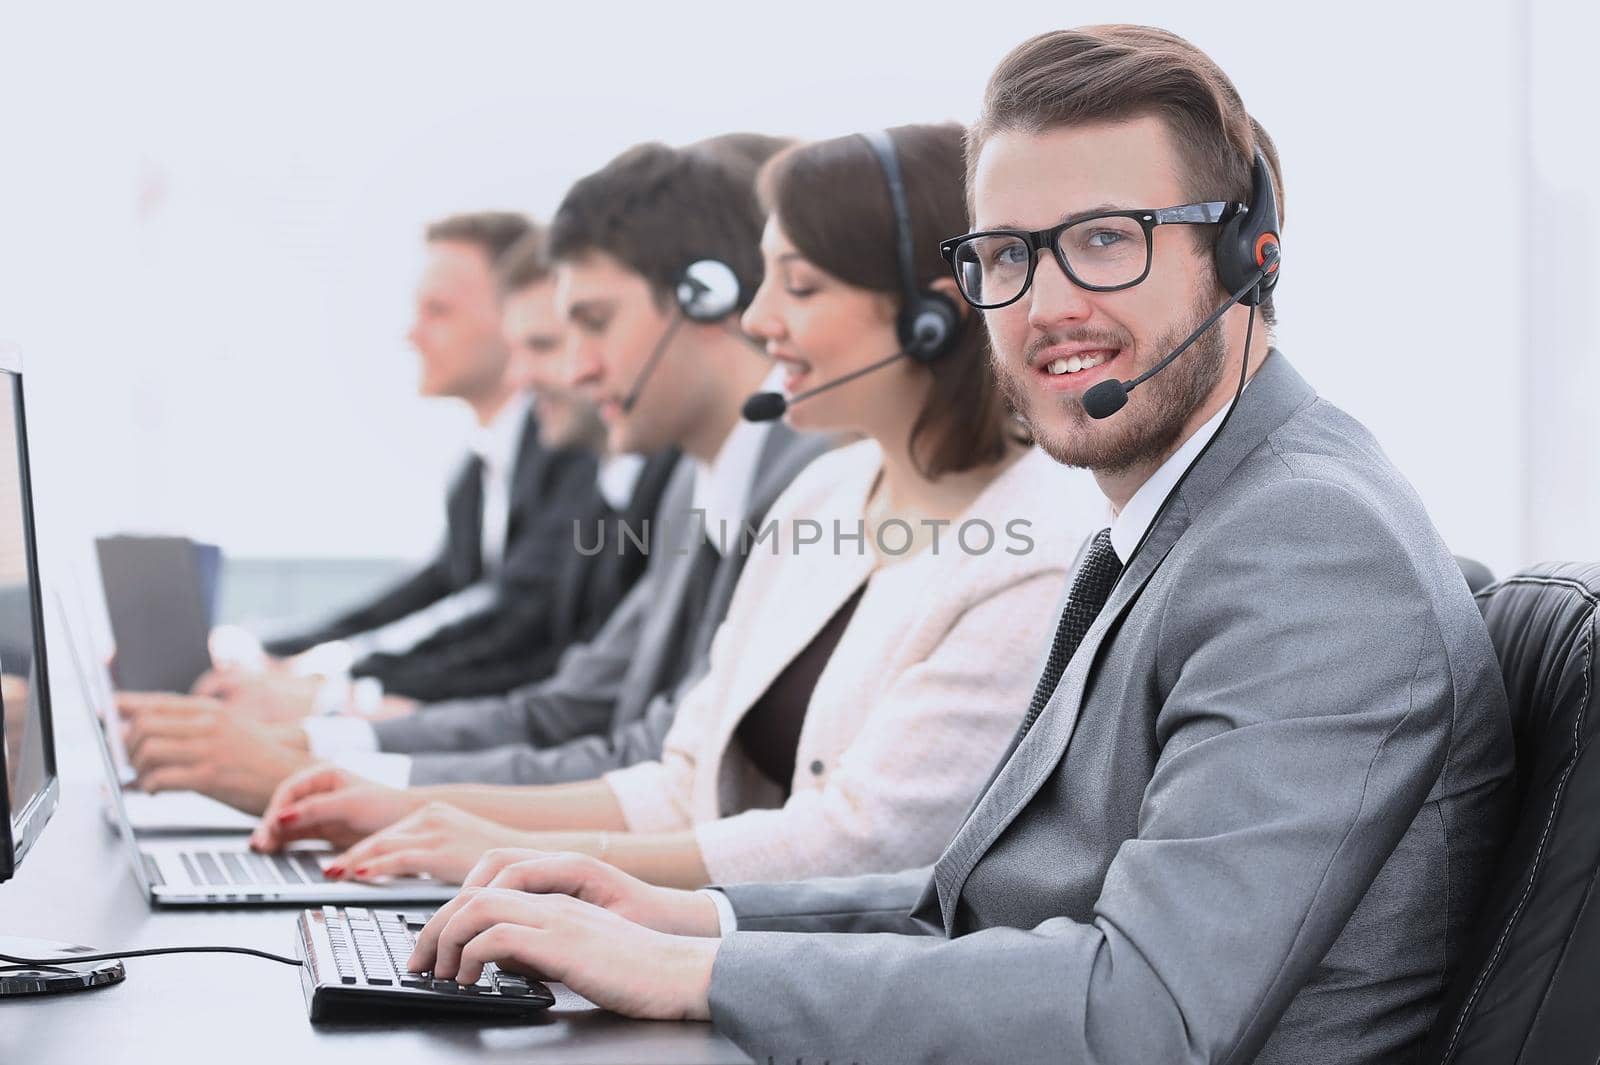 operator call center in the background of their colleagues